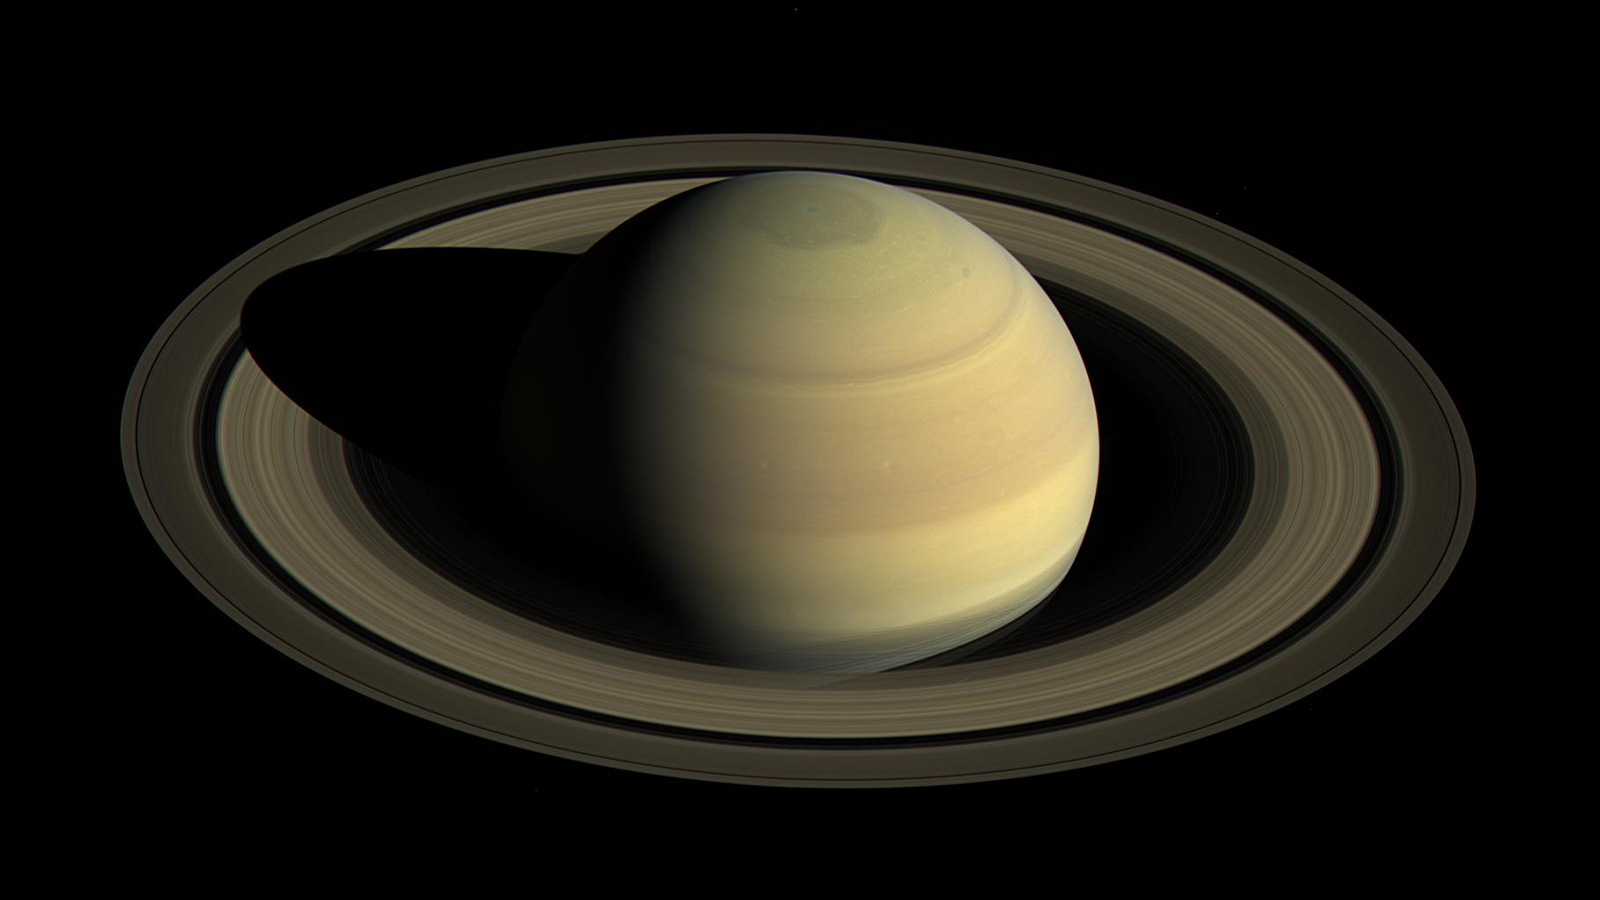 Esteban Twitterren: #Saturn: My rings are the most beautiful!!! #J1407b: I'm gonna end this planet whole career